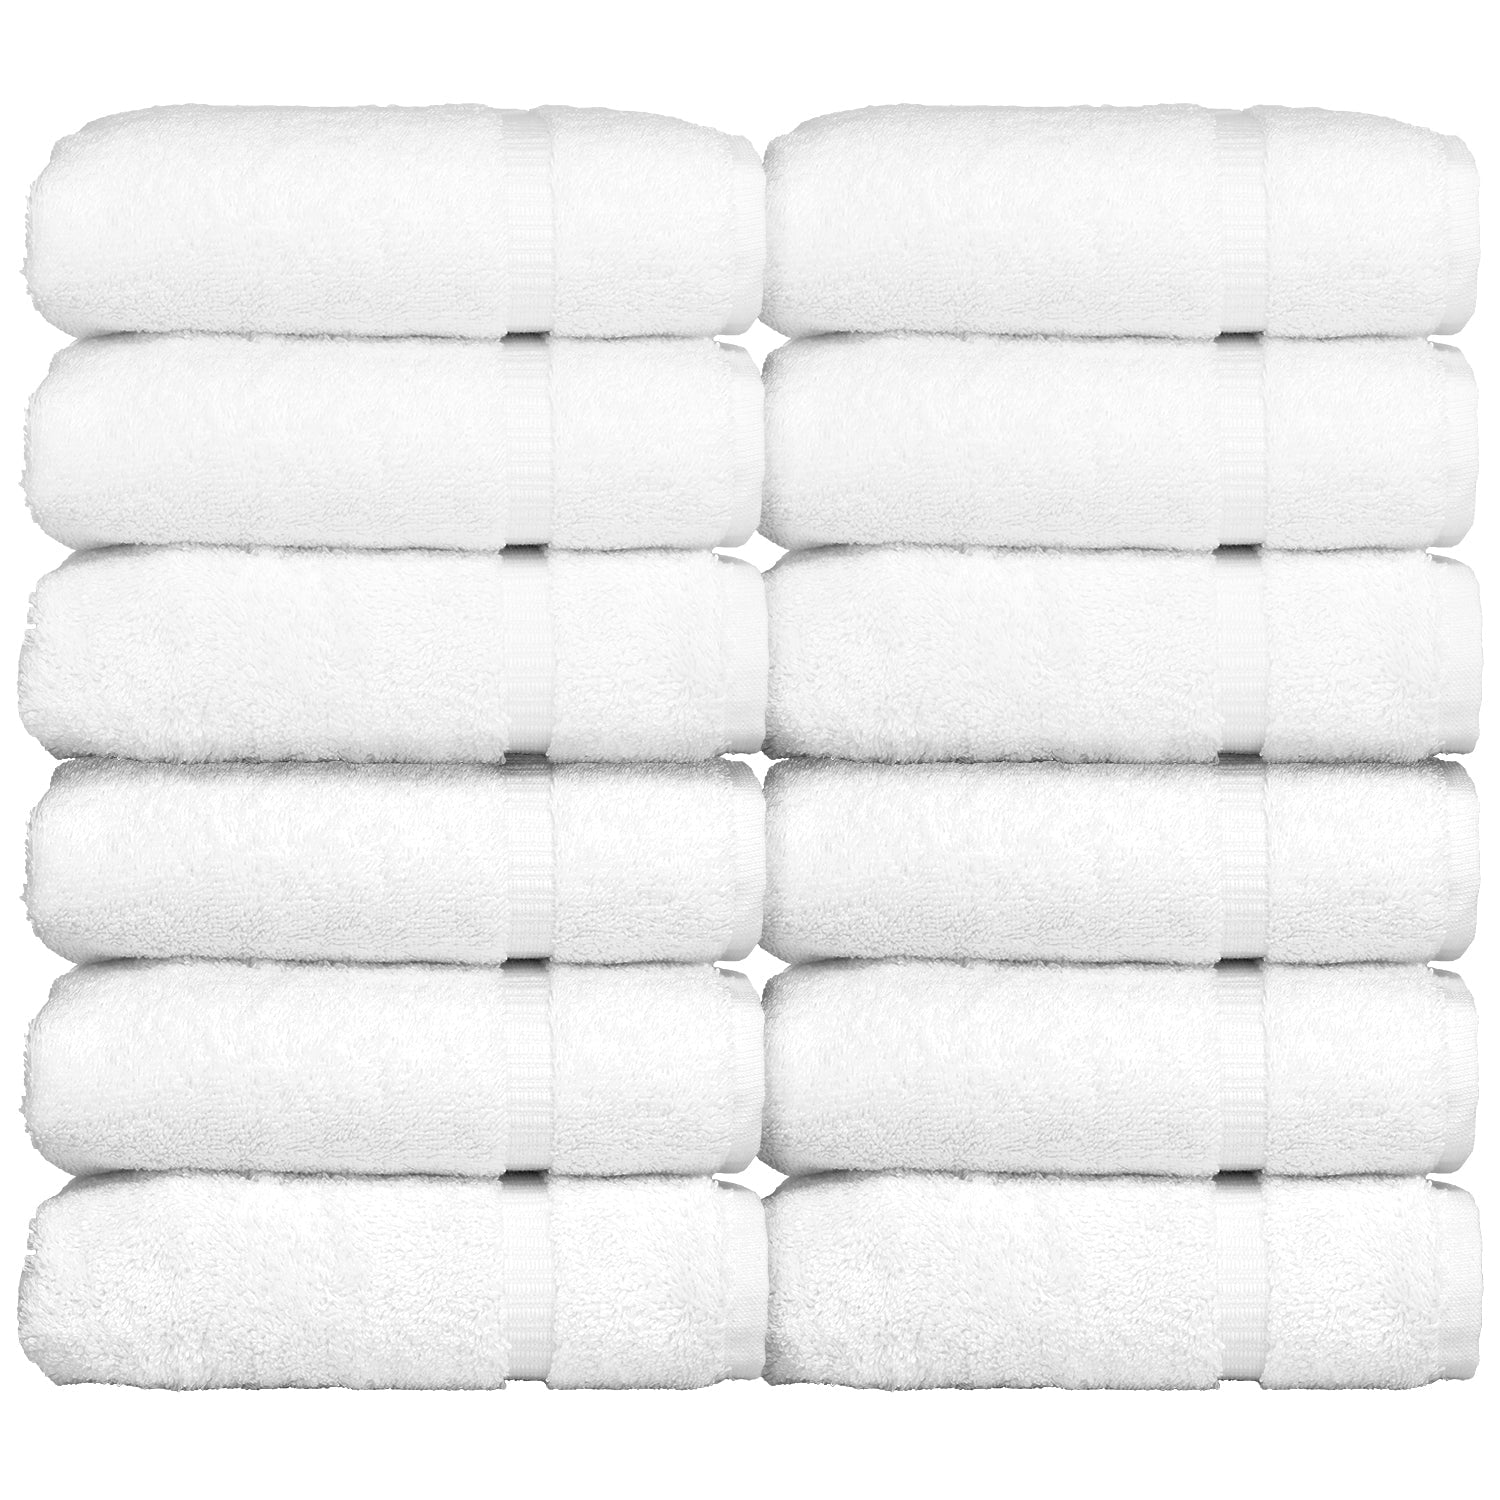 Bare Cotton Luxury Hotel & Spa Towel 100% Genuine Turkish Cotton Hand Towels -Cranberry-Dobby border- Set of 6